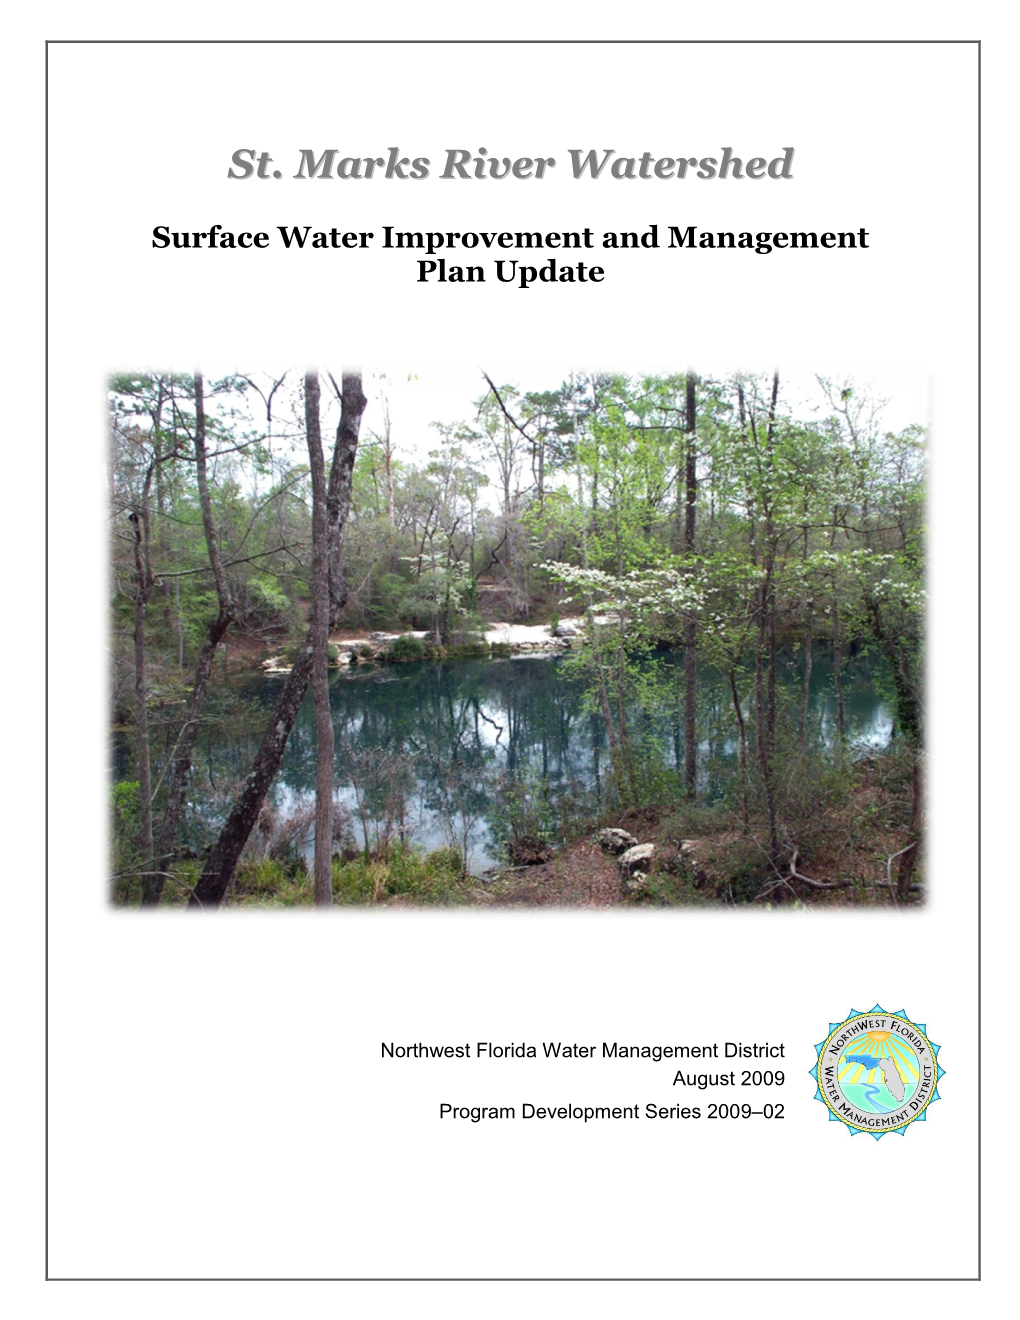 St. Marks River Watershed